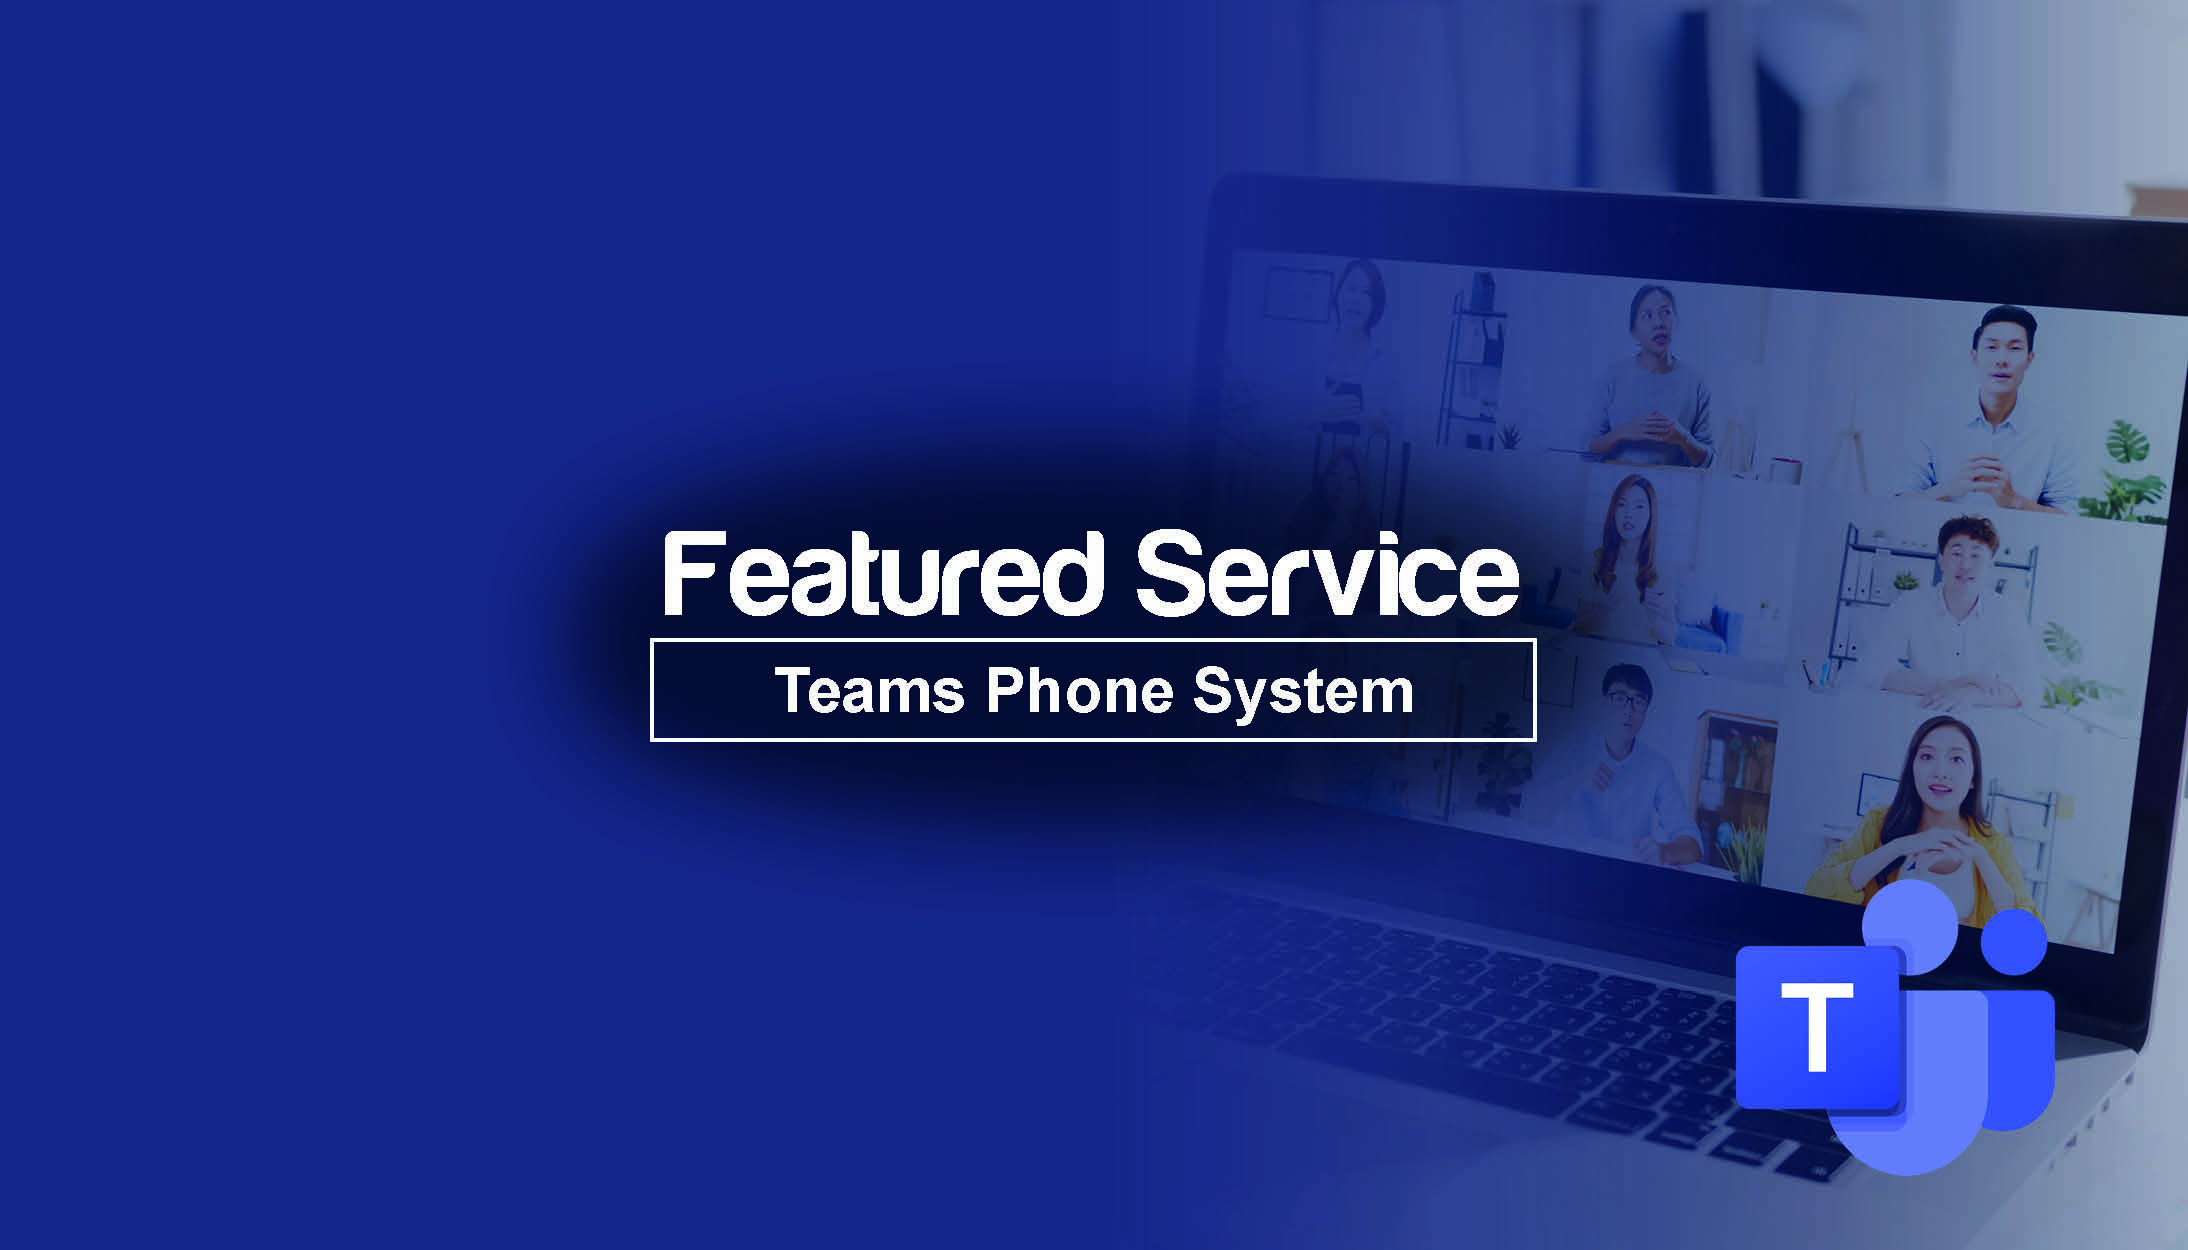 Teams phone system – voice calling is just the start.